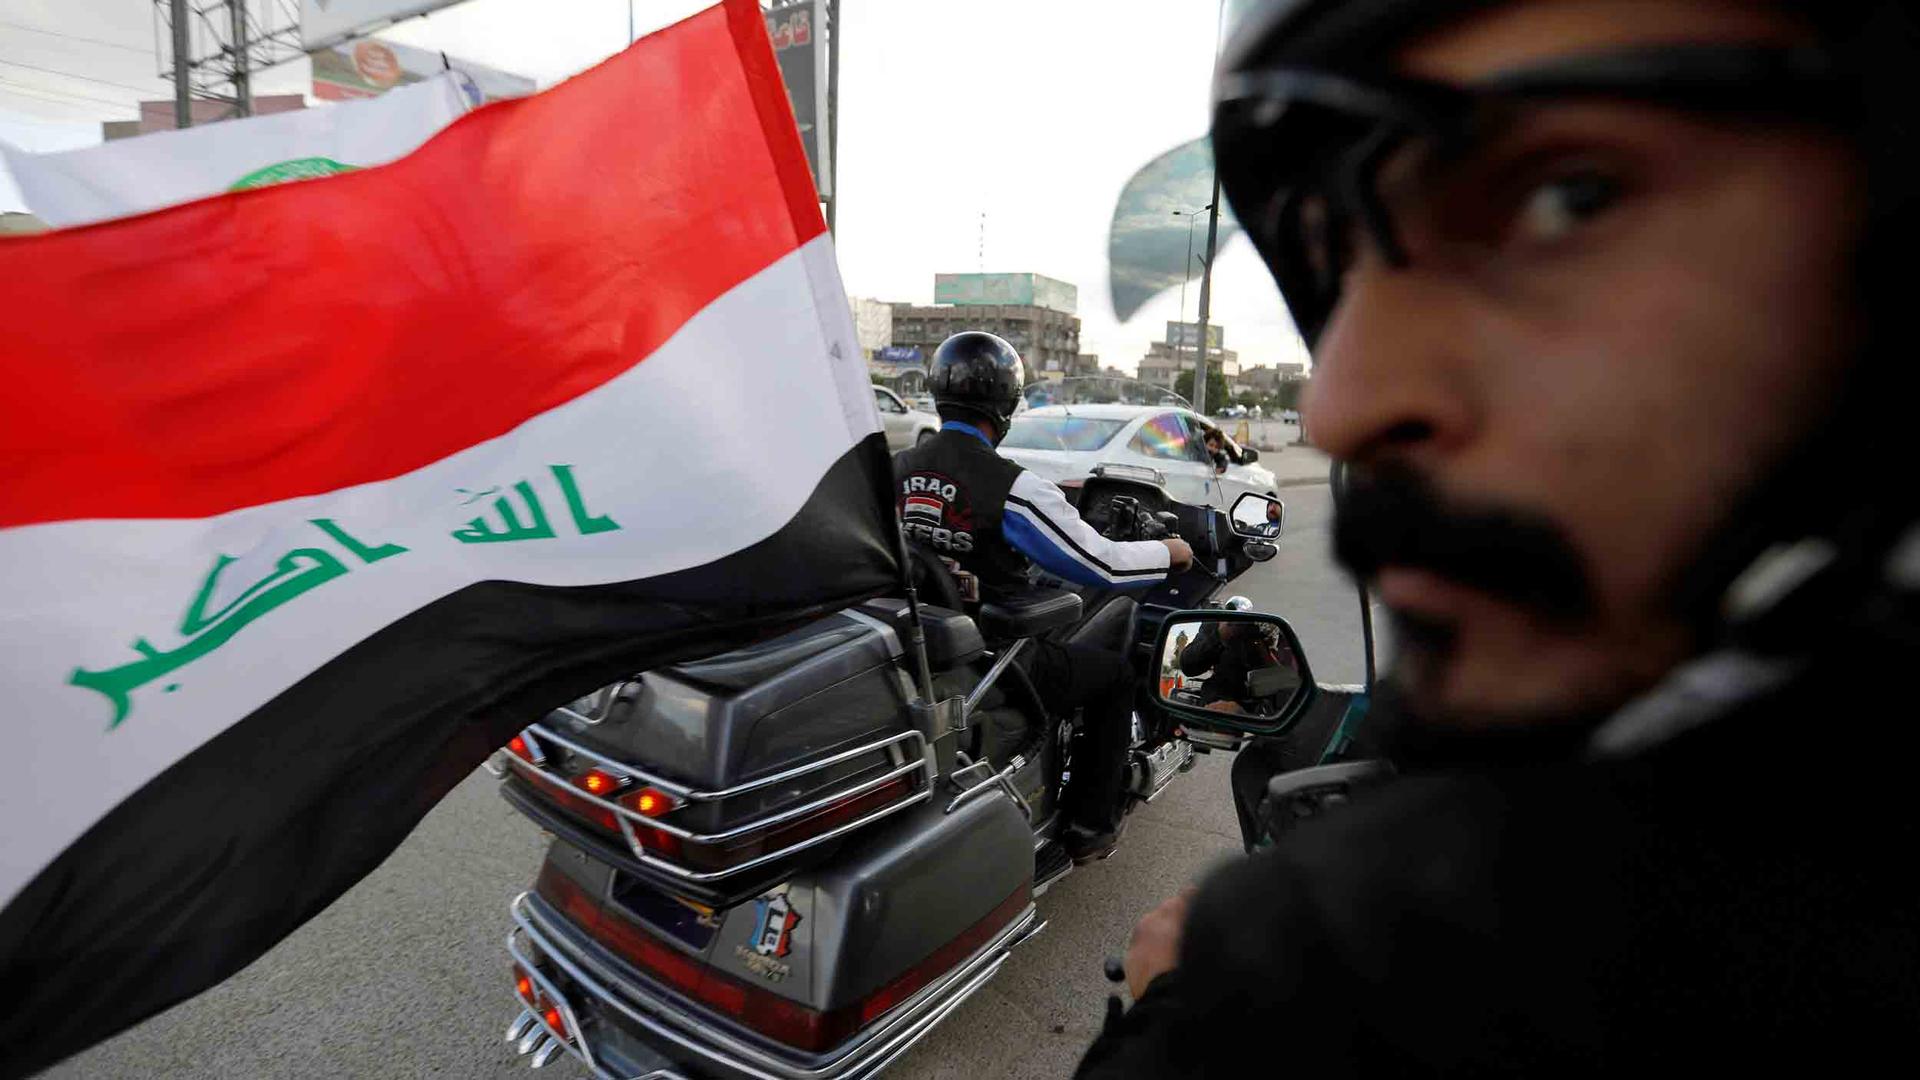 An Iraqi flag blows in the wind from the back of motorcycle.